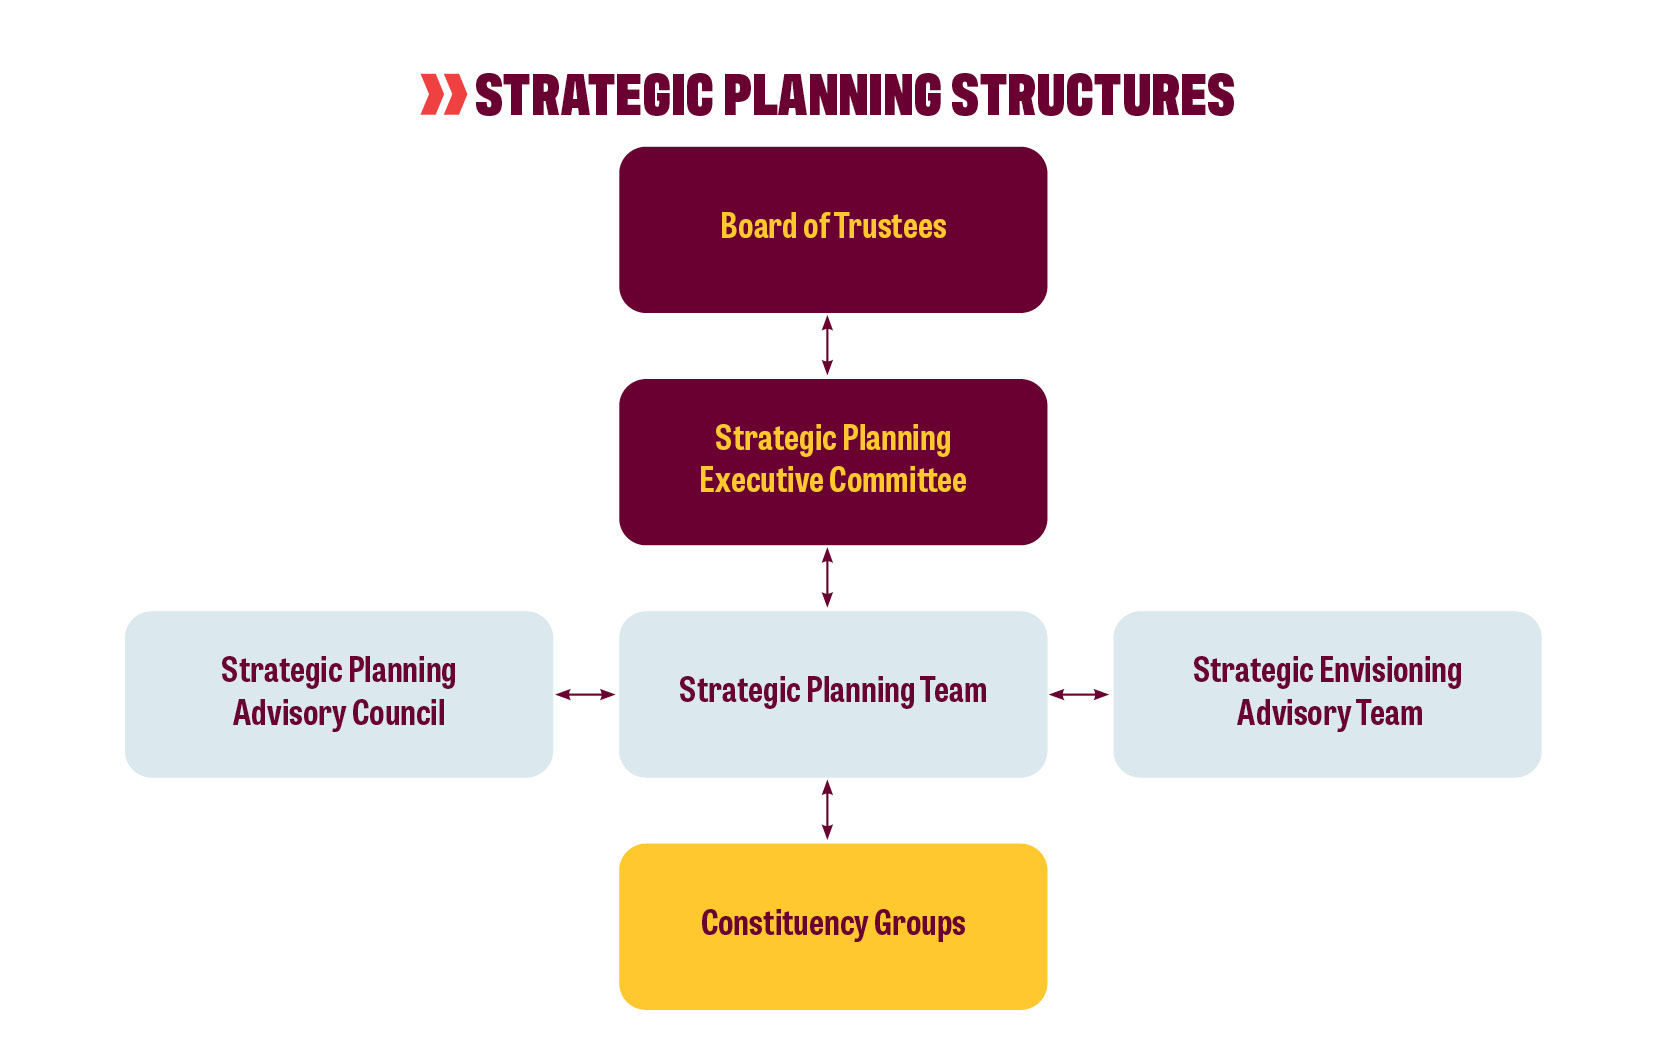 Strategic planning structures graphic with squares in maroon, light blue and gold explaining the organization flow.